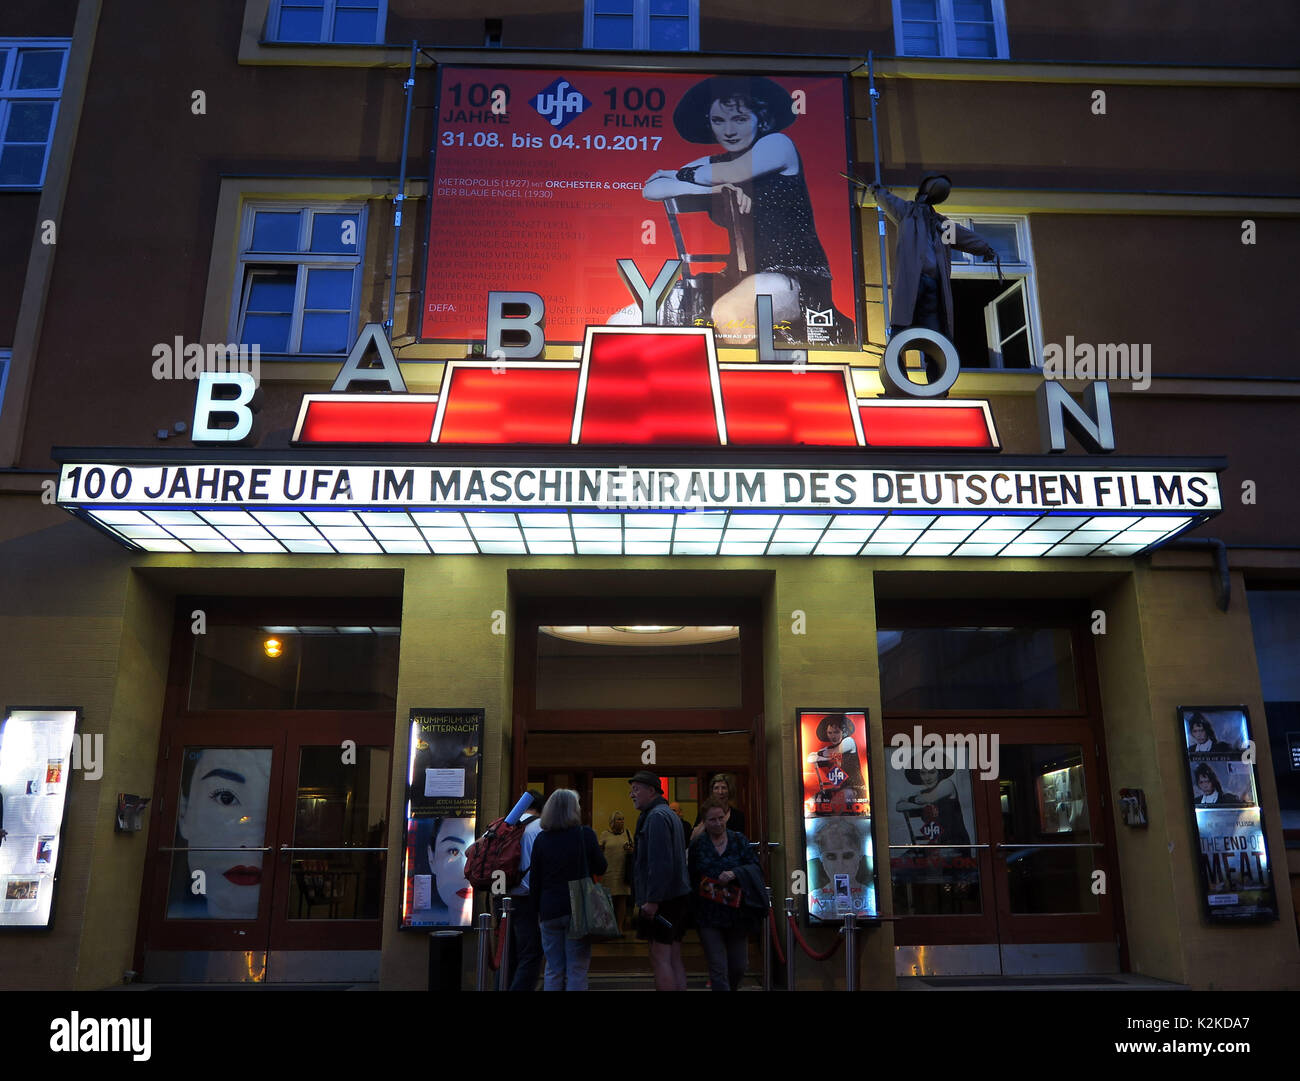 The Babylon cinema advertises the event series '100 Jahre Ufa 100 Filme' (lit. '100 Years of Ufa 100 Movies') with a photo of actress Marlene Dietrich from the movie 'Der Blaue Engel' in Berlin, Germany, 16 August 2017. Between 31 August and 4 October 2017, the Kino Babylon screens 100 movies of the UFA production studios. The Universum Film AG was founded in 1917. Photo: XAMAX/dpa Stock Photo